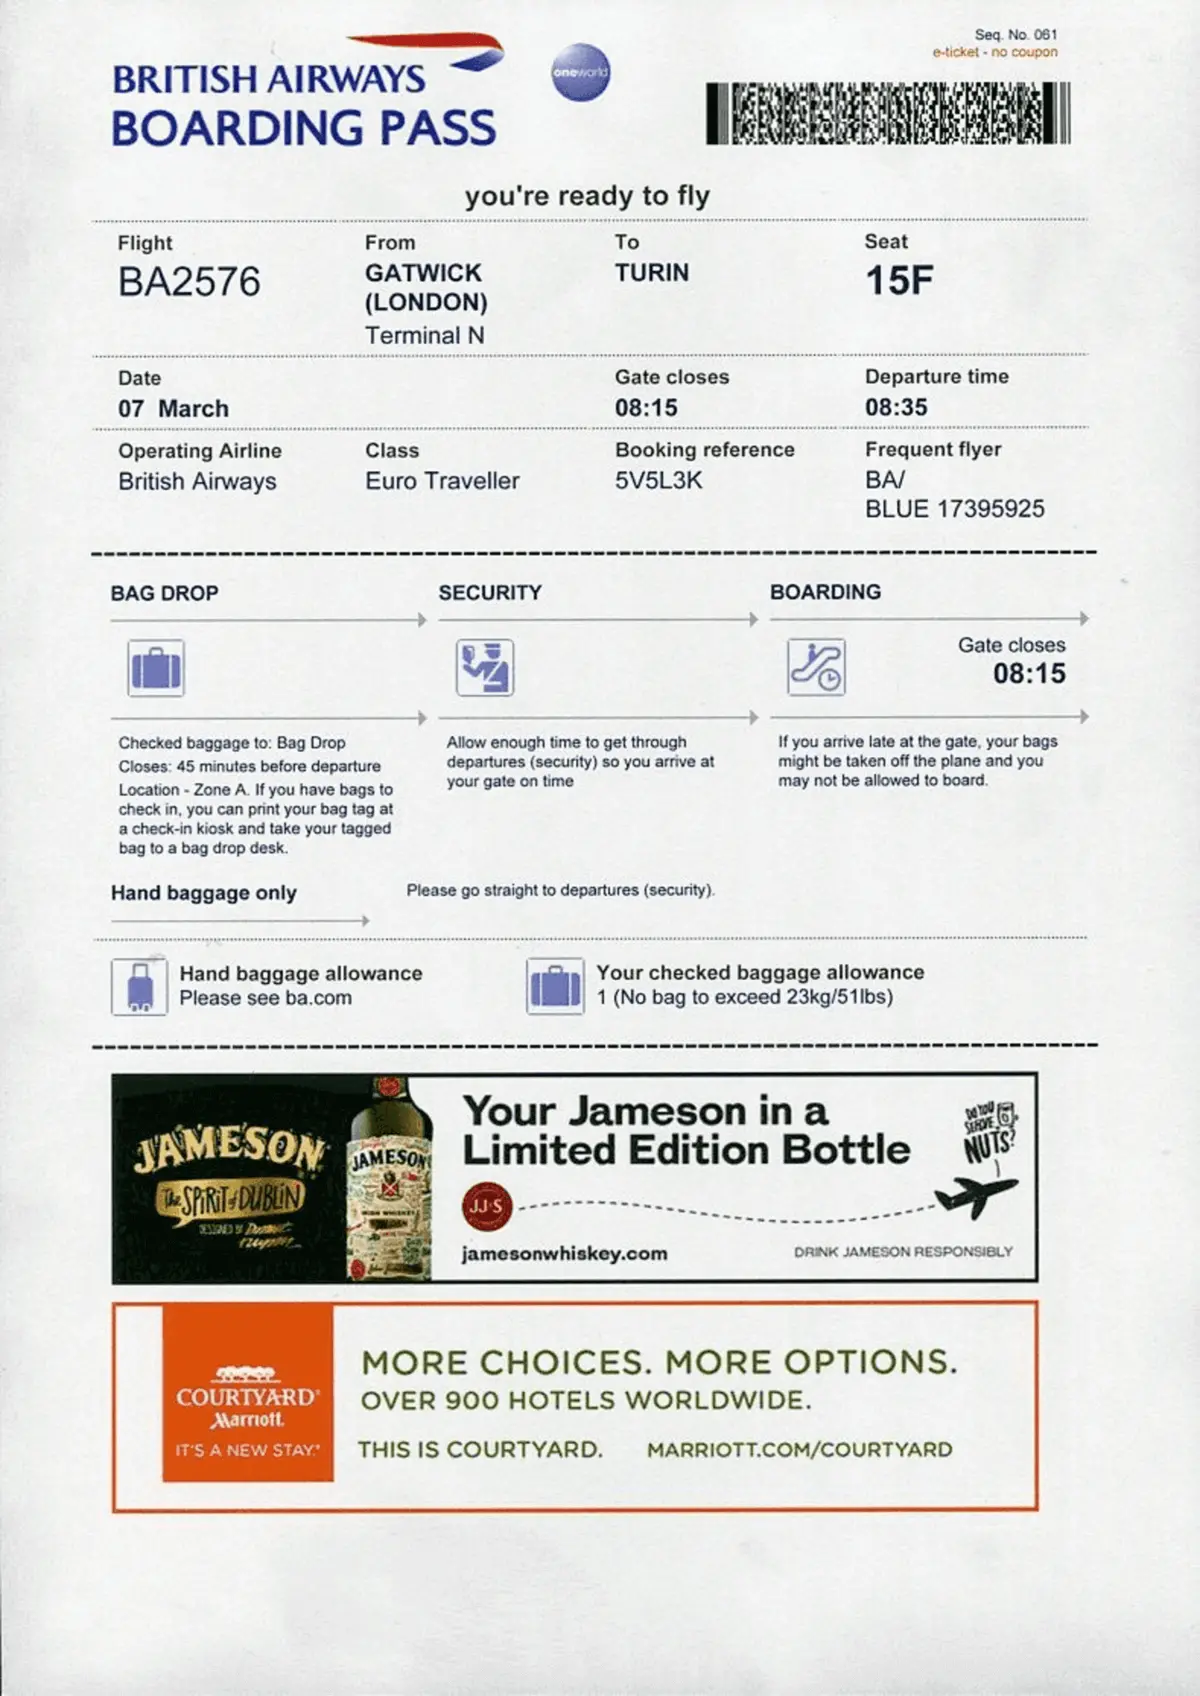 Singapore Airport Sin Advertising Boarding Passes A1